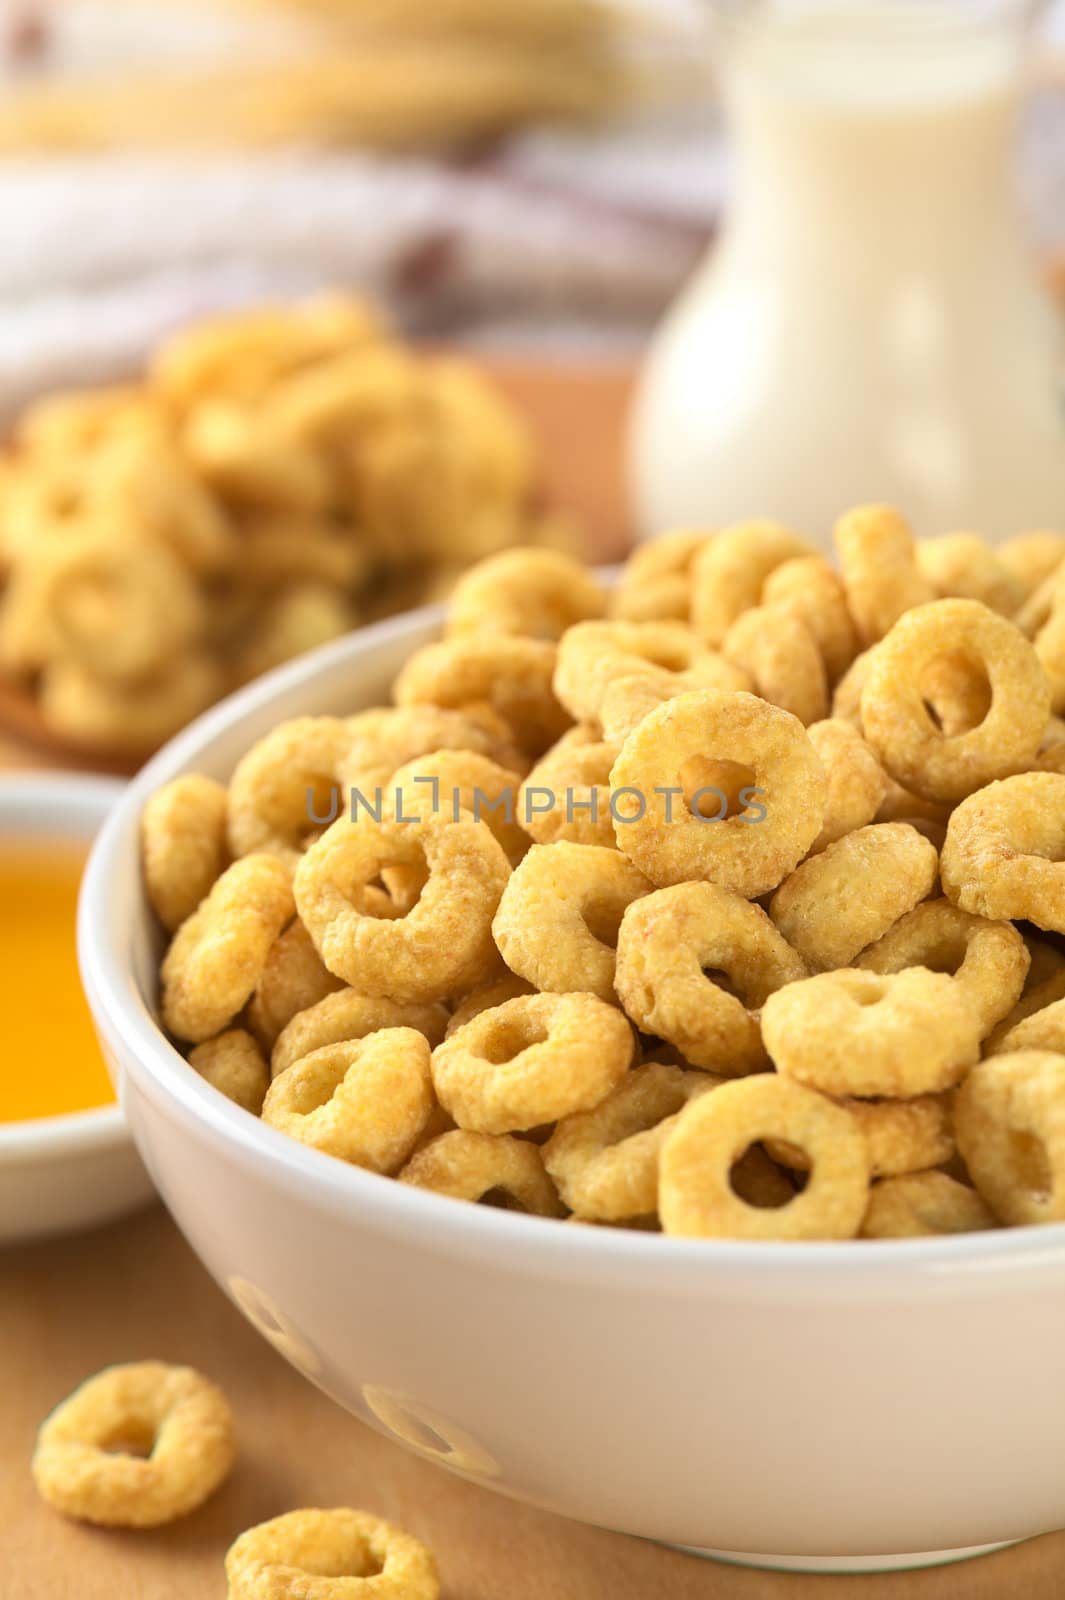 Honey Flavoured Cereal Loops by ildi